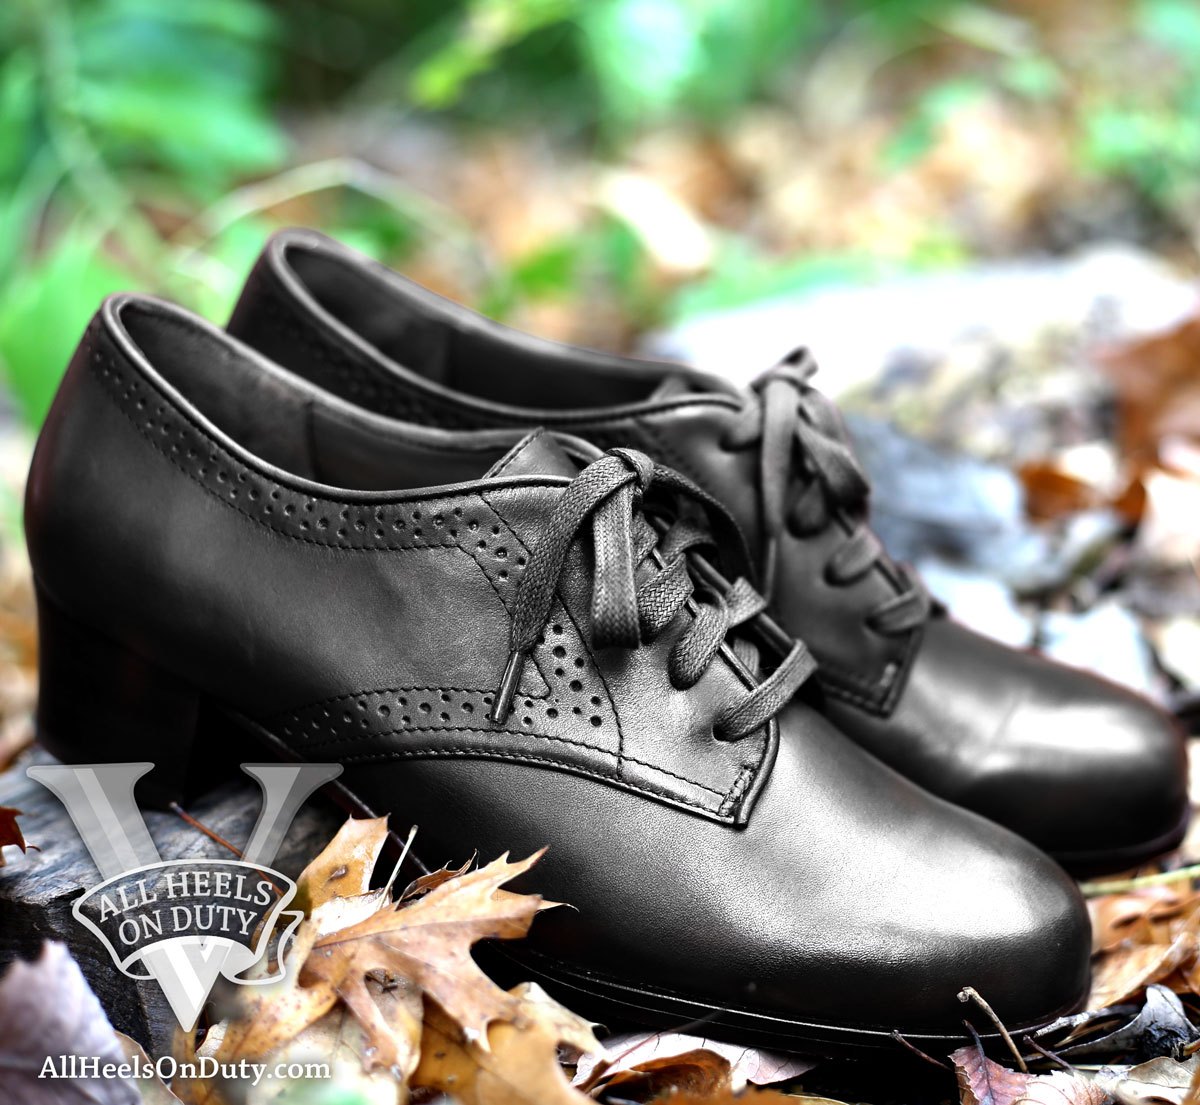 ww2-wave-wac-wasp-service-oxford-shoes-black-leather.jpg